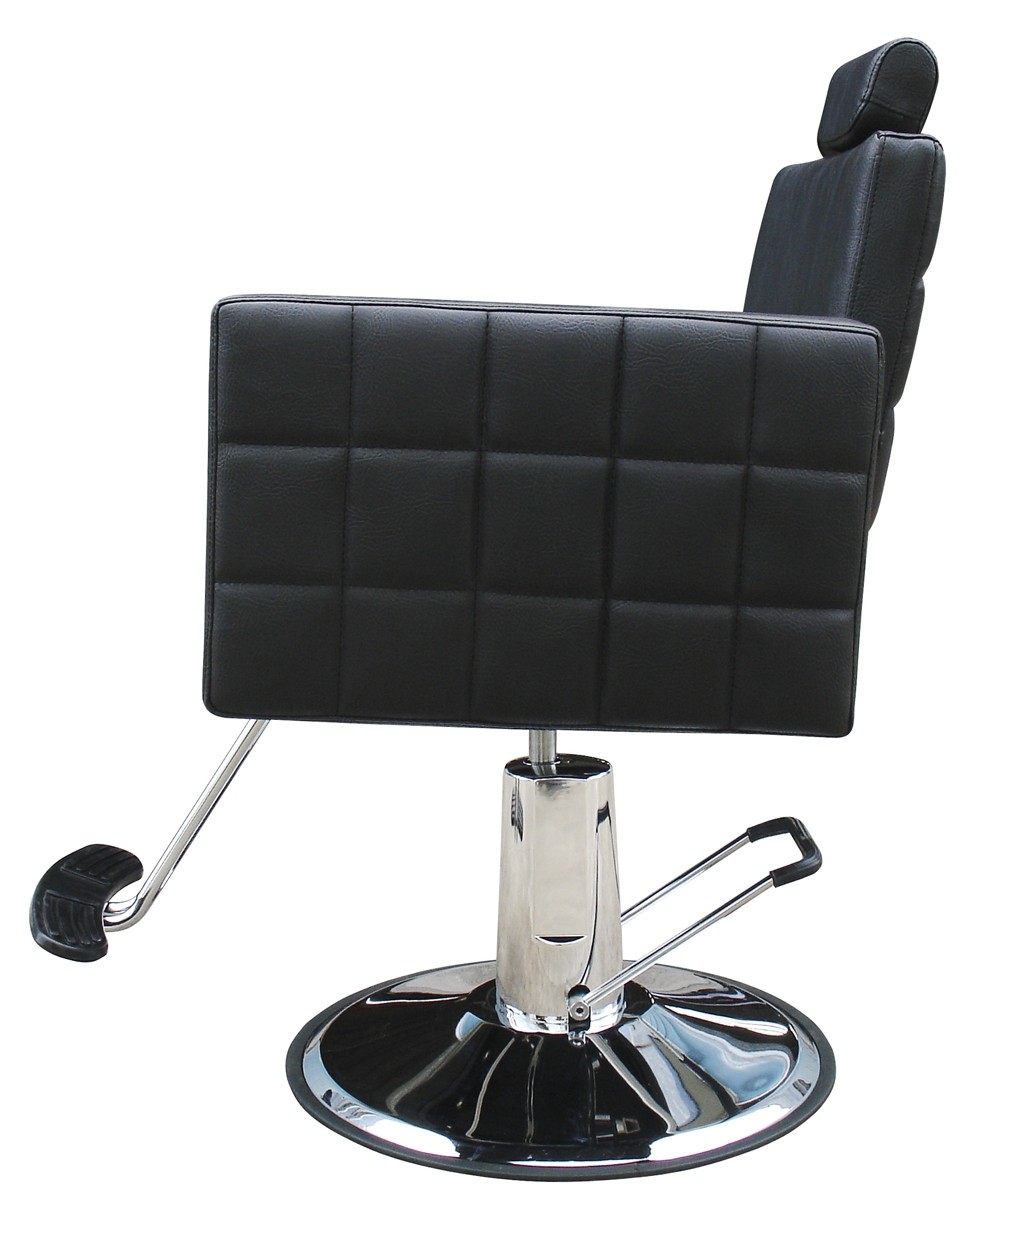 Icon All Purpose Chair